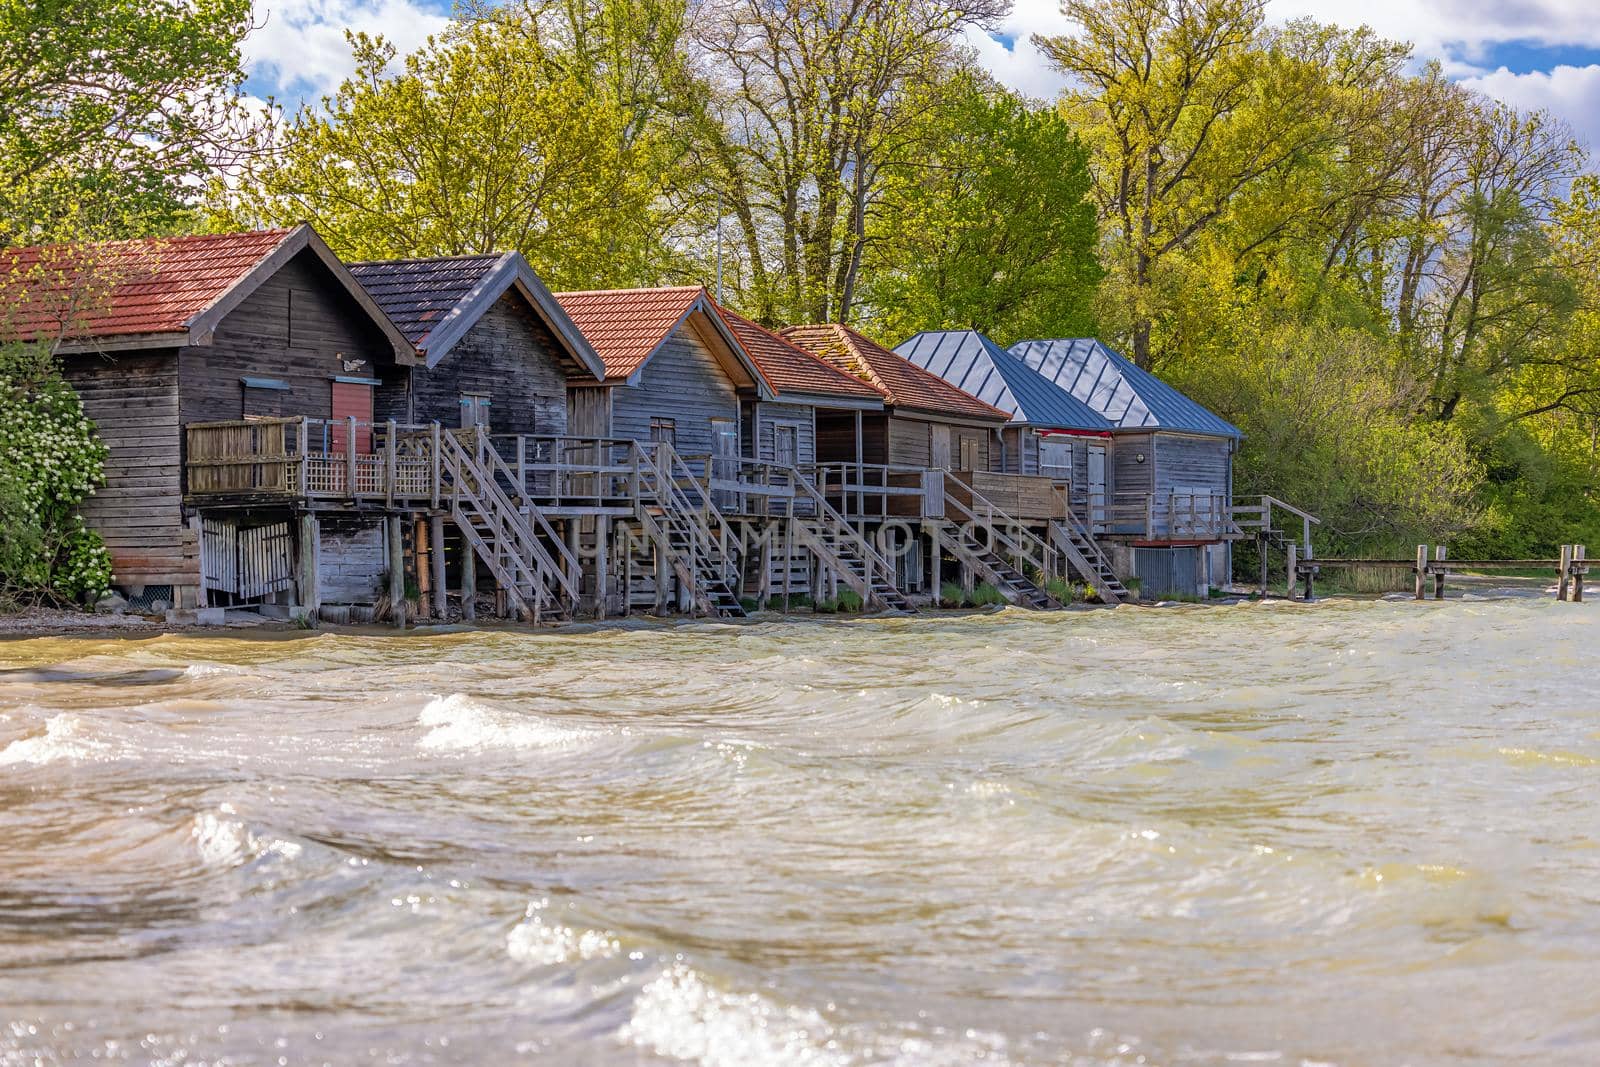 Ammersee, Bavaria, Germany, boat houses on the water  by seka33